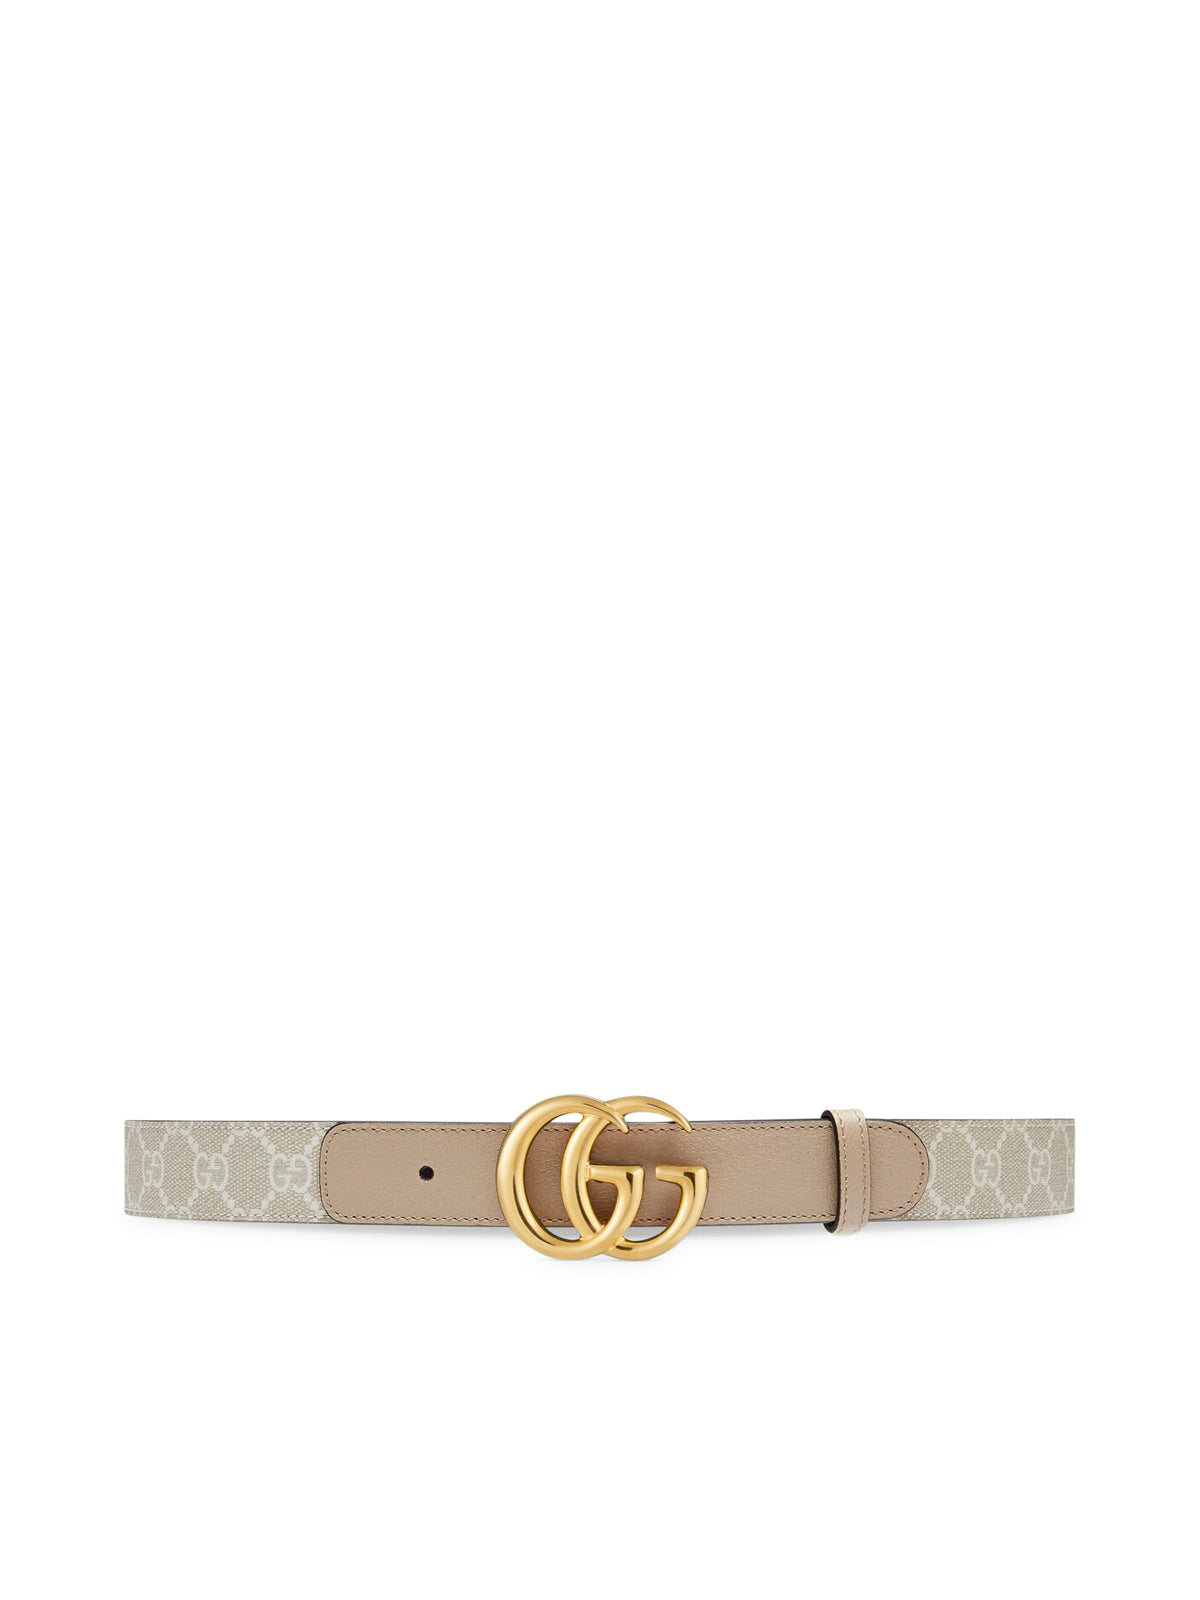 Gucci GG Marmont Jumbo GG Wide Belt, Size Gucci 110, Beige, GG Canvas